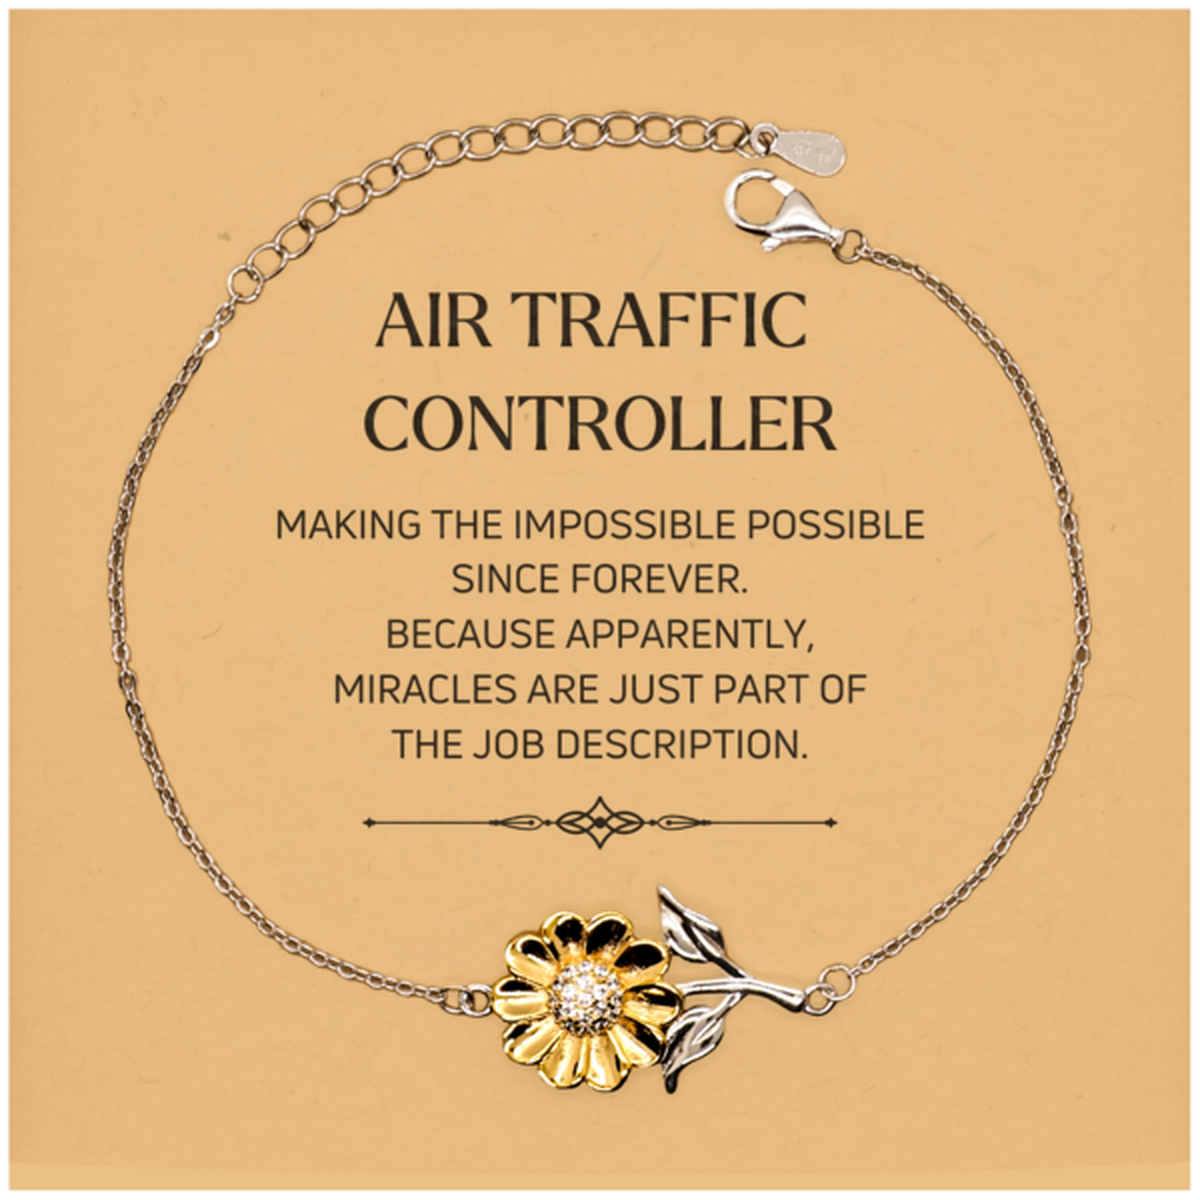 Funny Air Traffic Controller Gifts, Miracles are just part of the job description, Inspirational Birthday Christmas Sunflower Bracelet For Air Traffic Controller, Men, Women, Coworkers, Friends, Boss